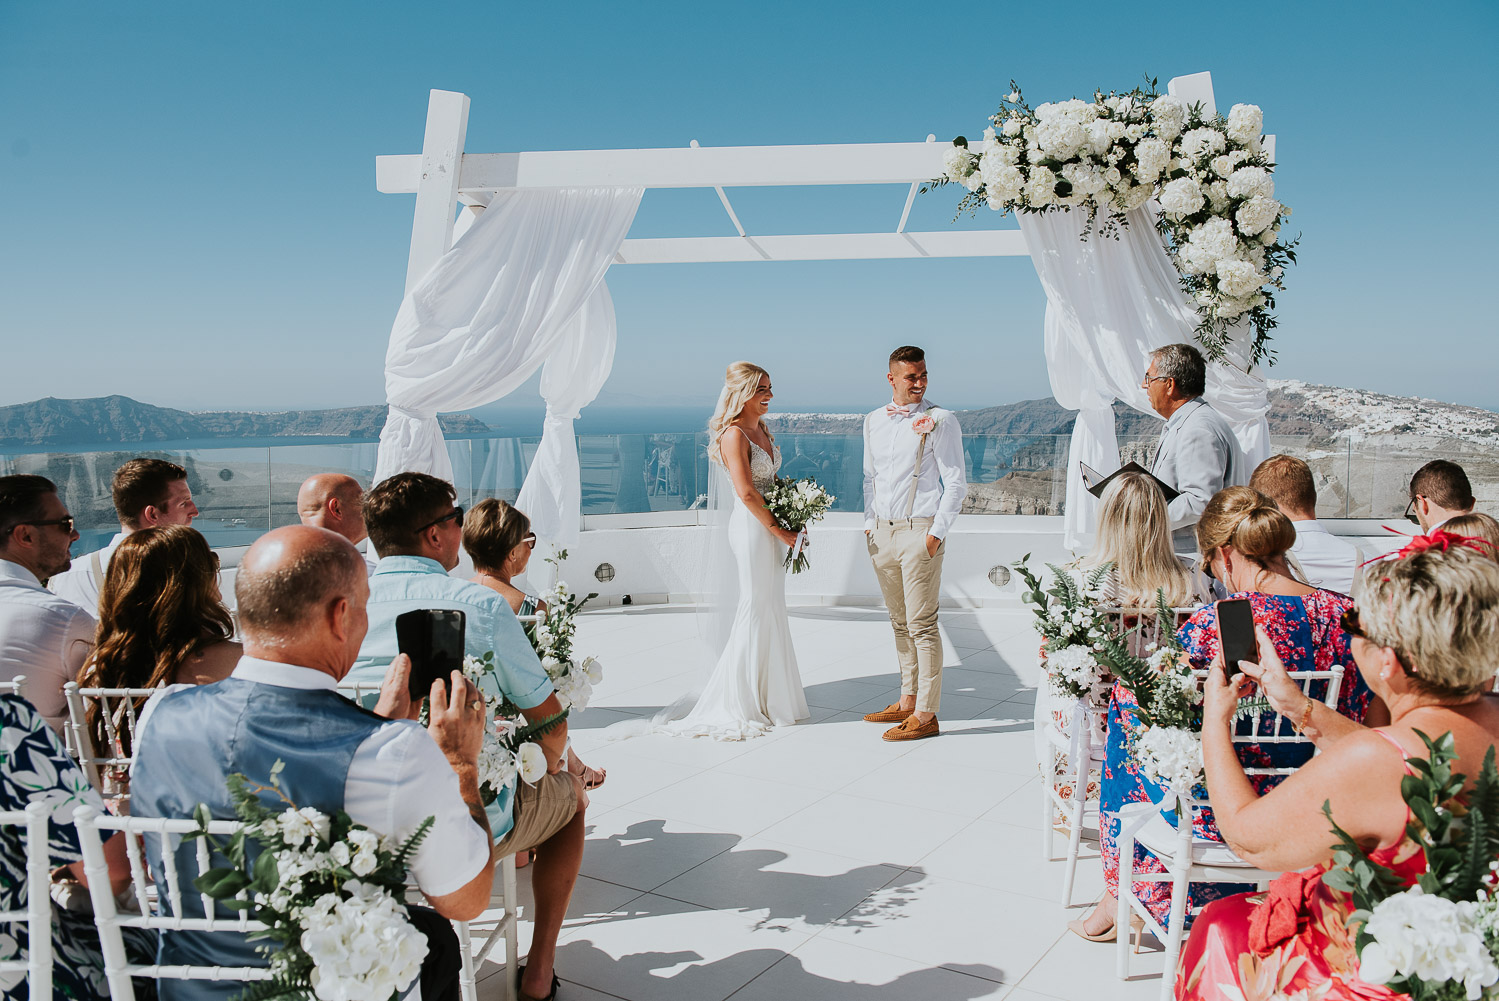 Wedding photographer Santorini: panoramic photo of bride and groom standing in front of gazebo with guests in foreground by Ben and Vesna.